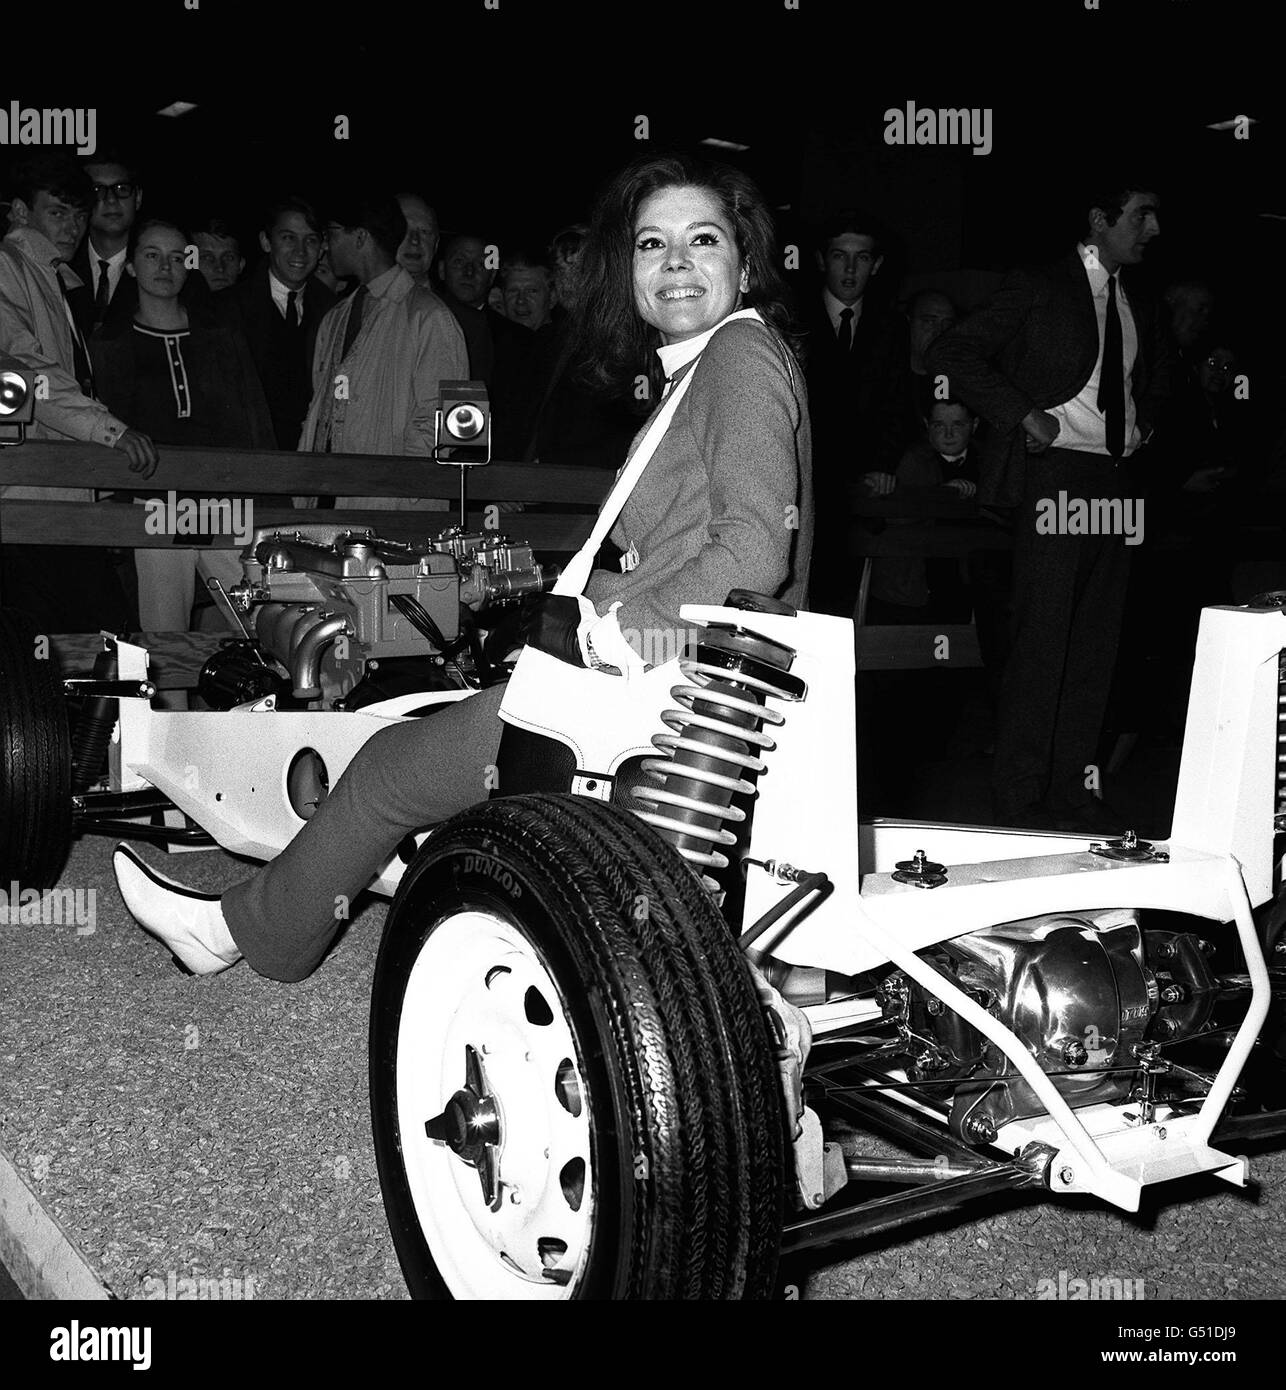 Actress Diana Rigg, who plays Emma Peel in the television series The Avengers', sits on the secrets of a Lotus Elan chassis, on the Lotus stand at the Motor Show held at Earls Court in London. DIANA RIGG DIANA RIGG Stock Photo